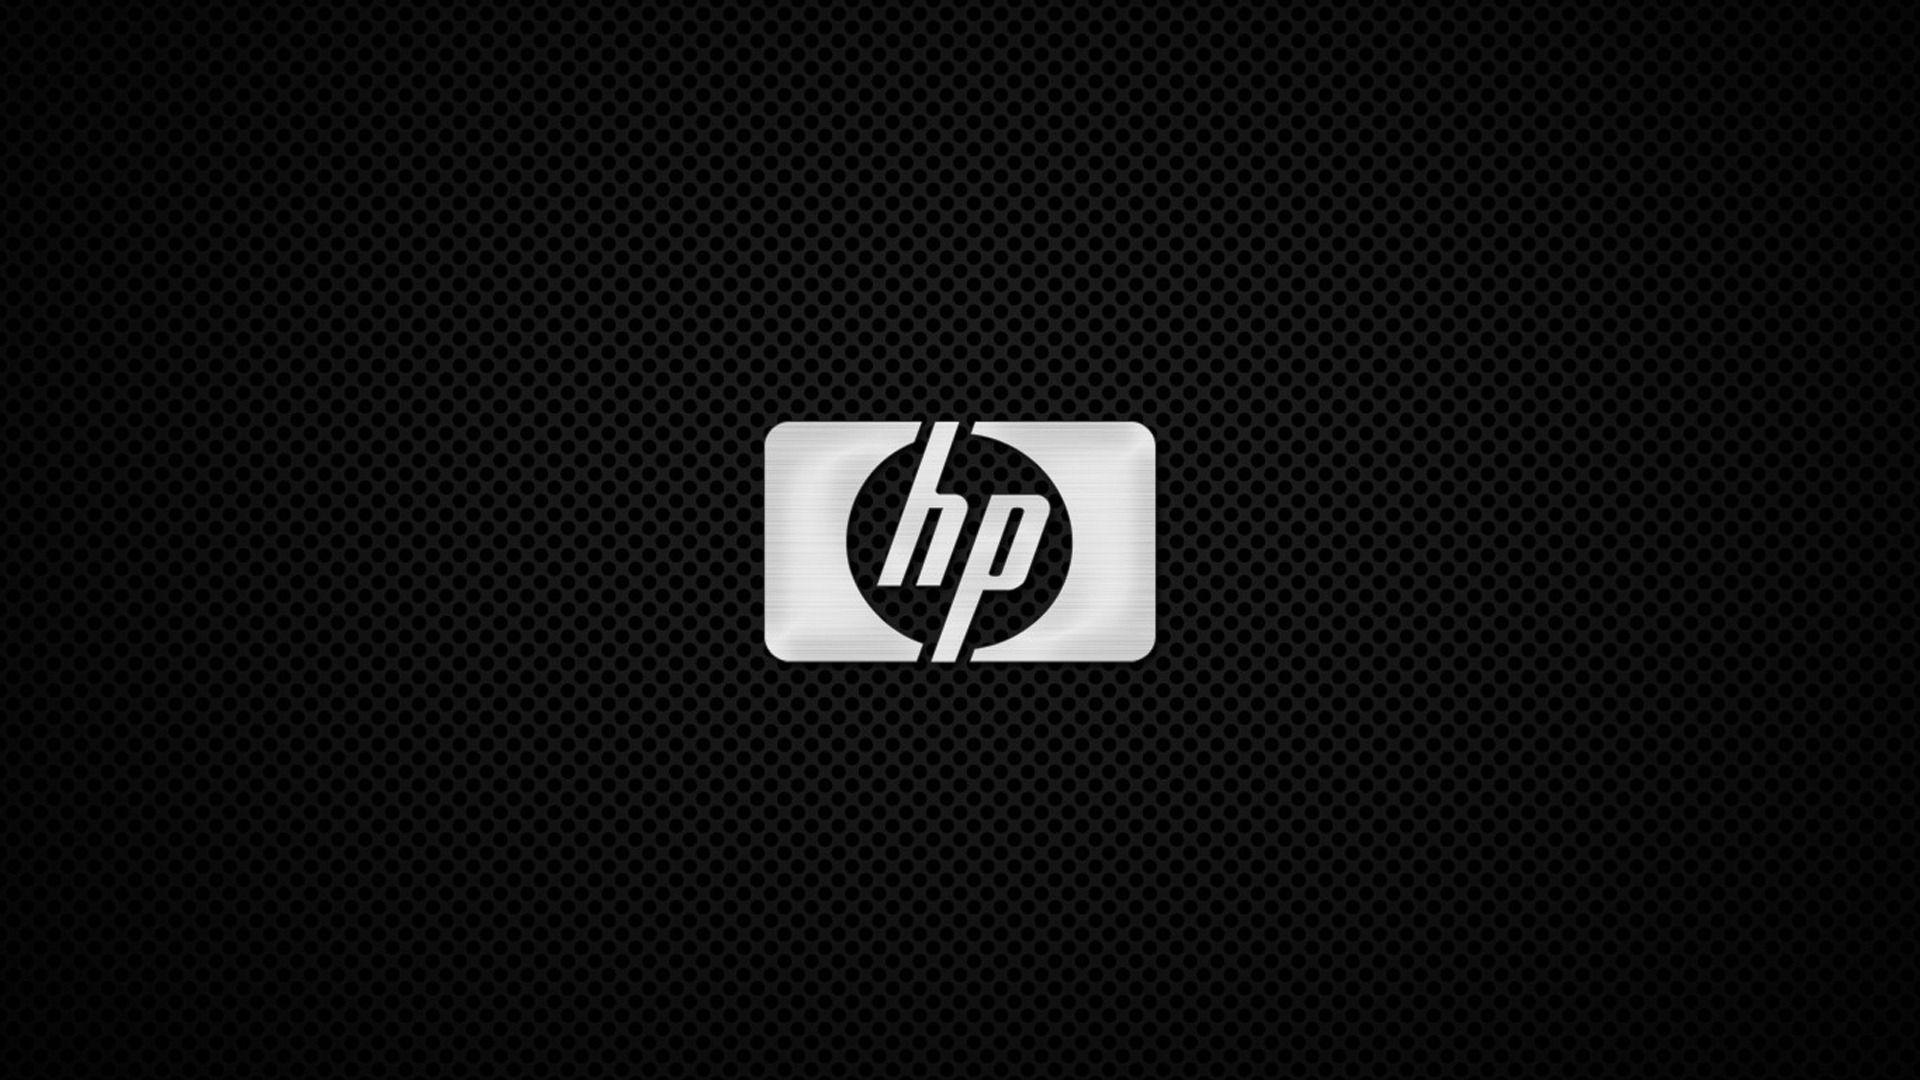 Latest HP Logo - HP logo on the grid wallpapers and images - wallpapers, pictures, photos